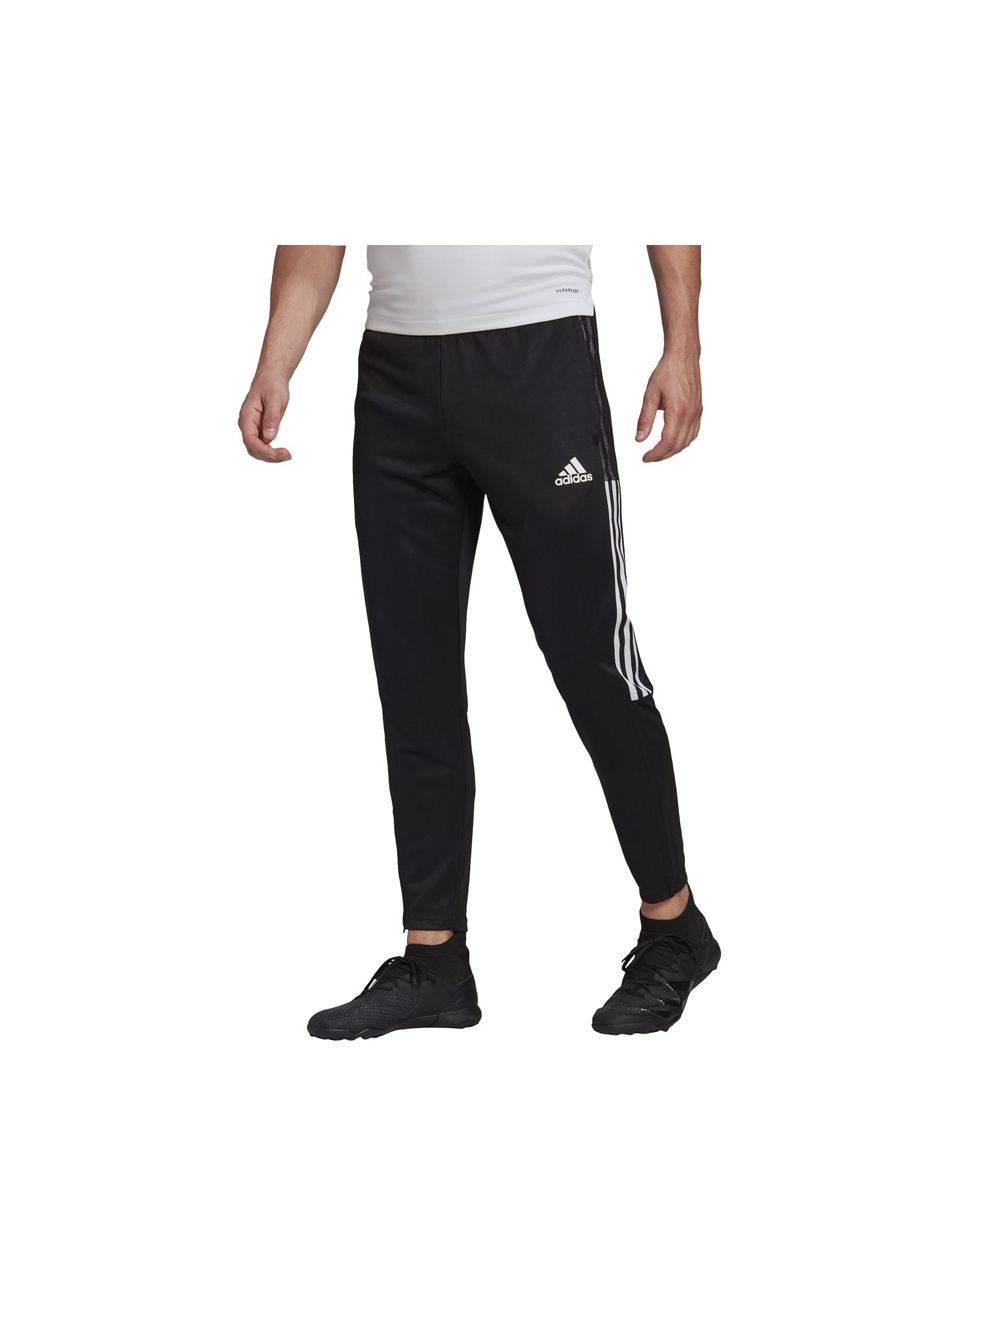 adidas x Wales Bonner Knitted Track Pants | Coggles